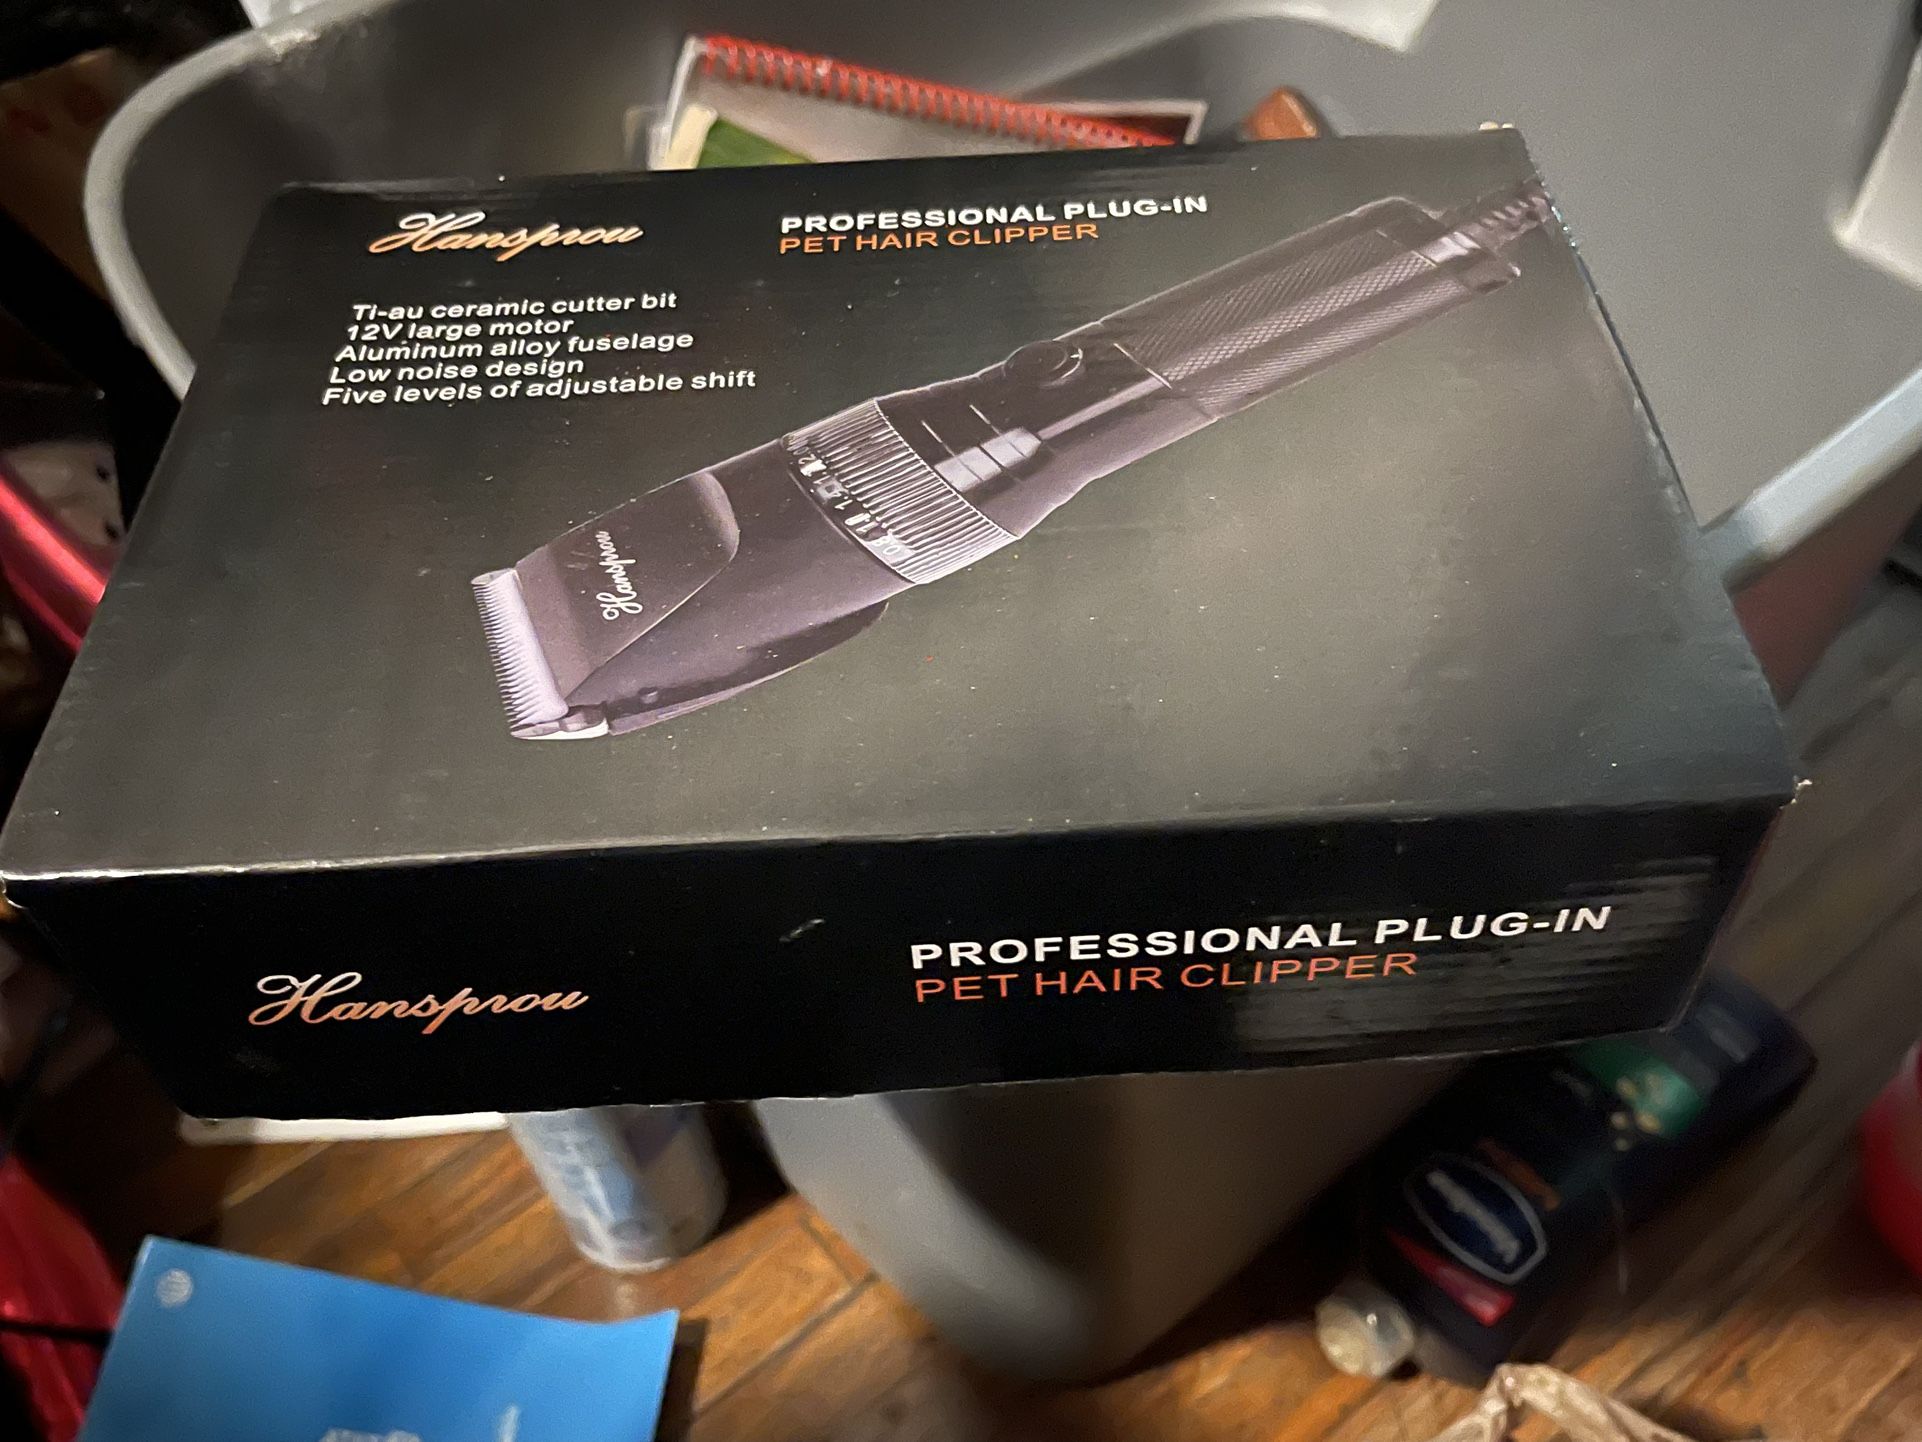 Hansprou professional, plug-in, pet hair clippers brand new